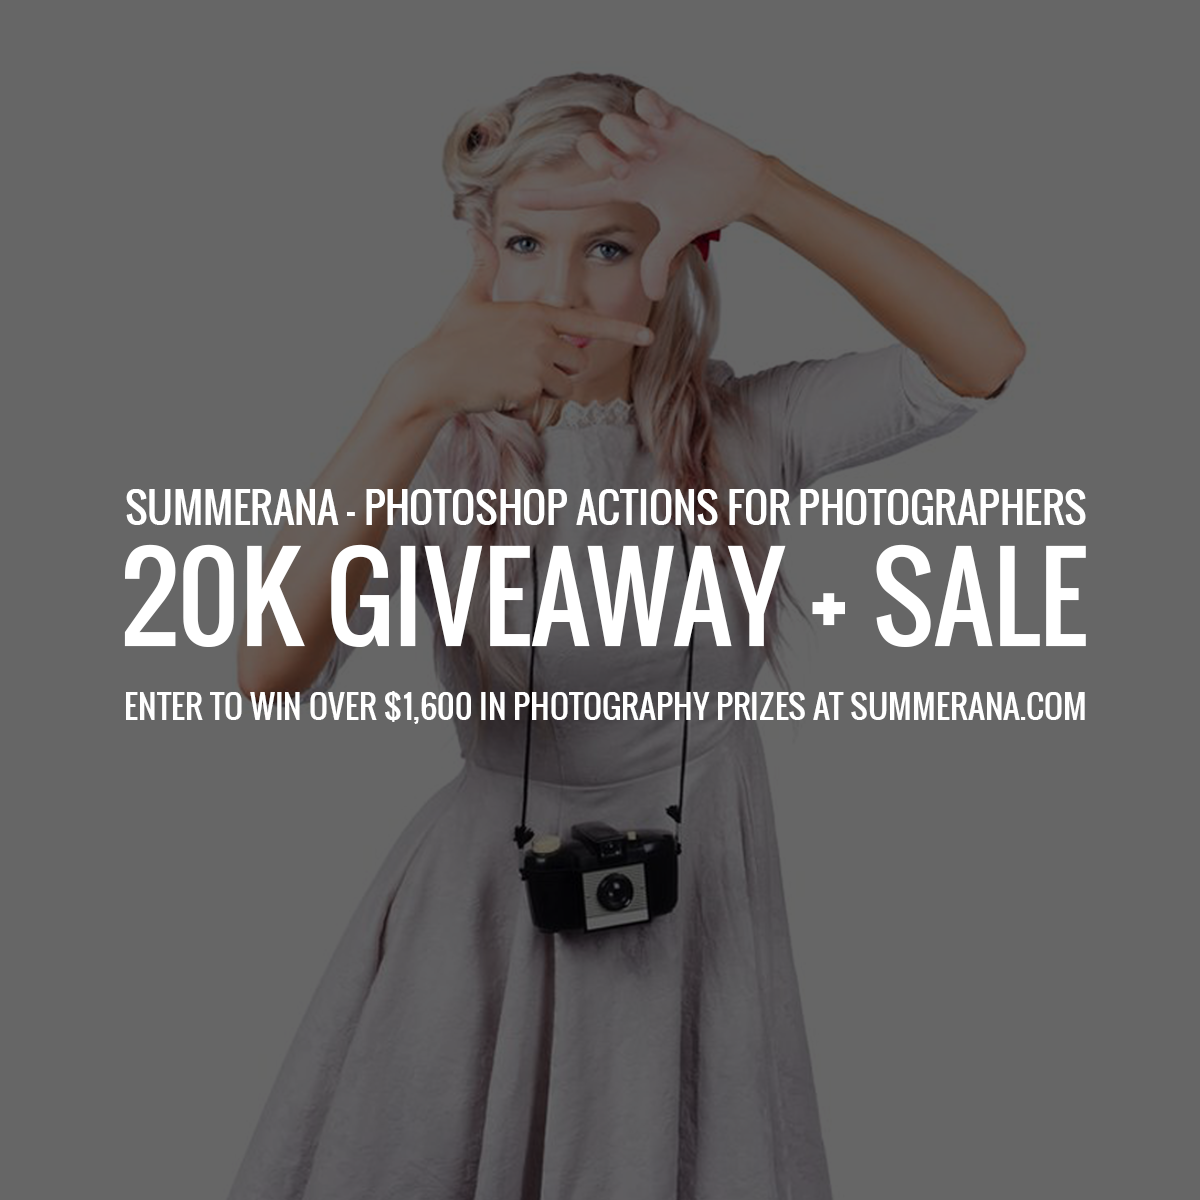 summerana-photoshop-actions-for-photographers-giveaway-and-sale